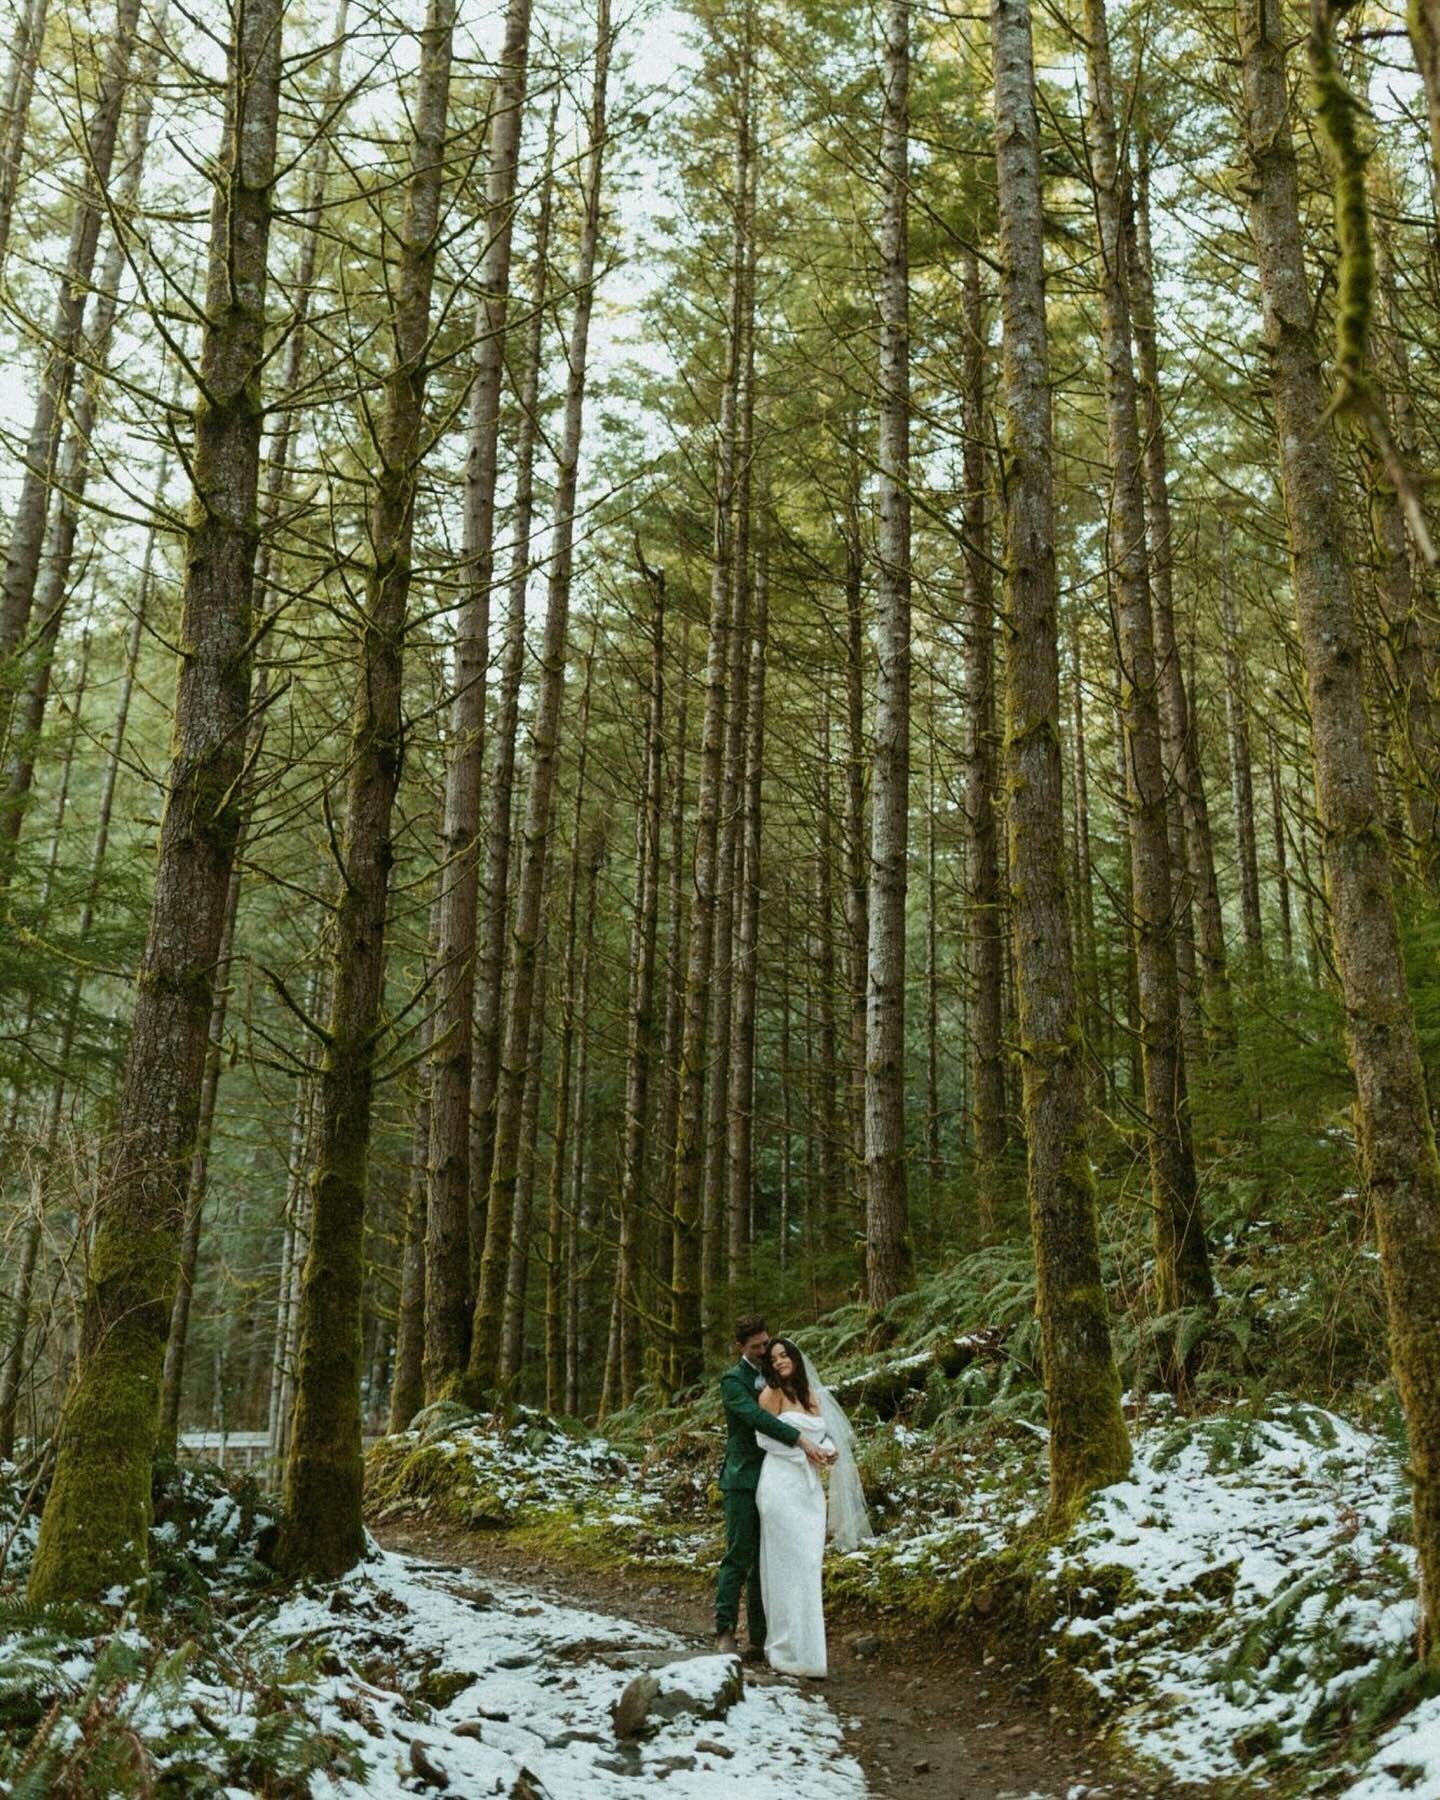 Sprinkled with snow and surrounded by mossy treetops sparkling in the spring sunshine 🌲🌞

For a brief moment in time, the forest was our home. We met Briana and Michael atop a mountain blanketed in forest. It was early spring and the last patches o